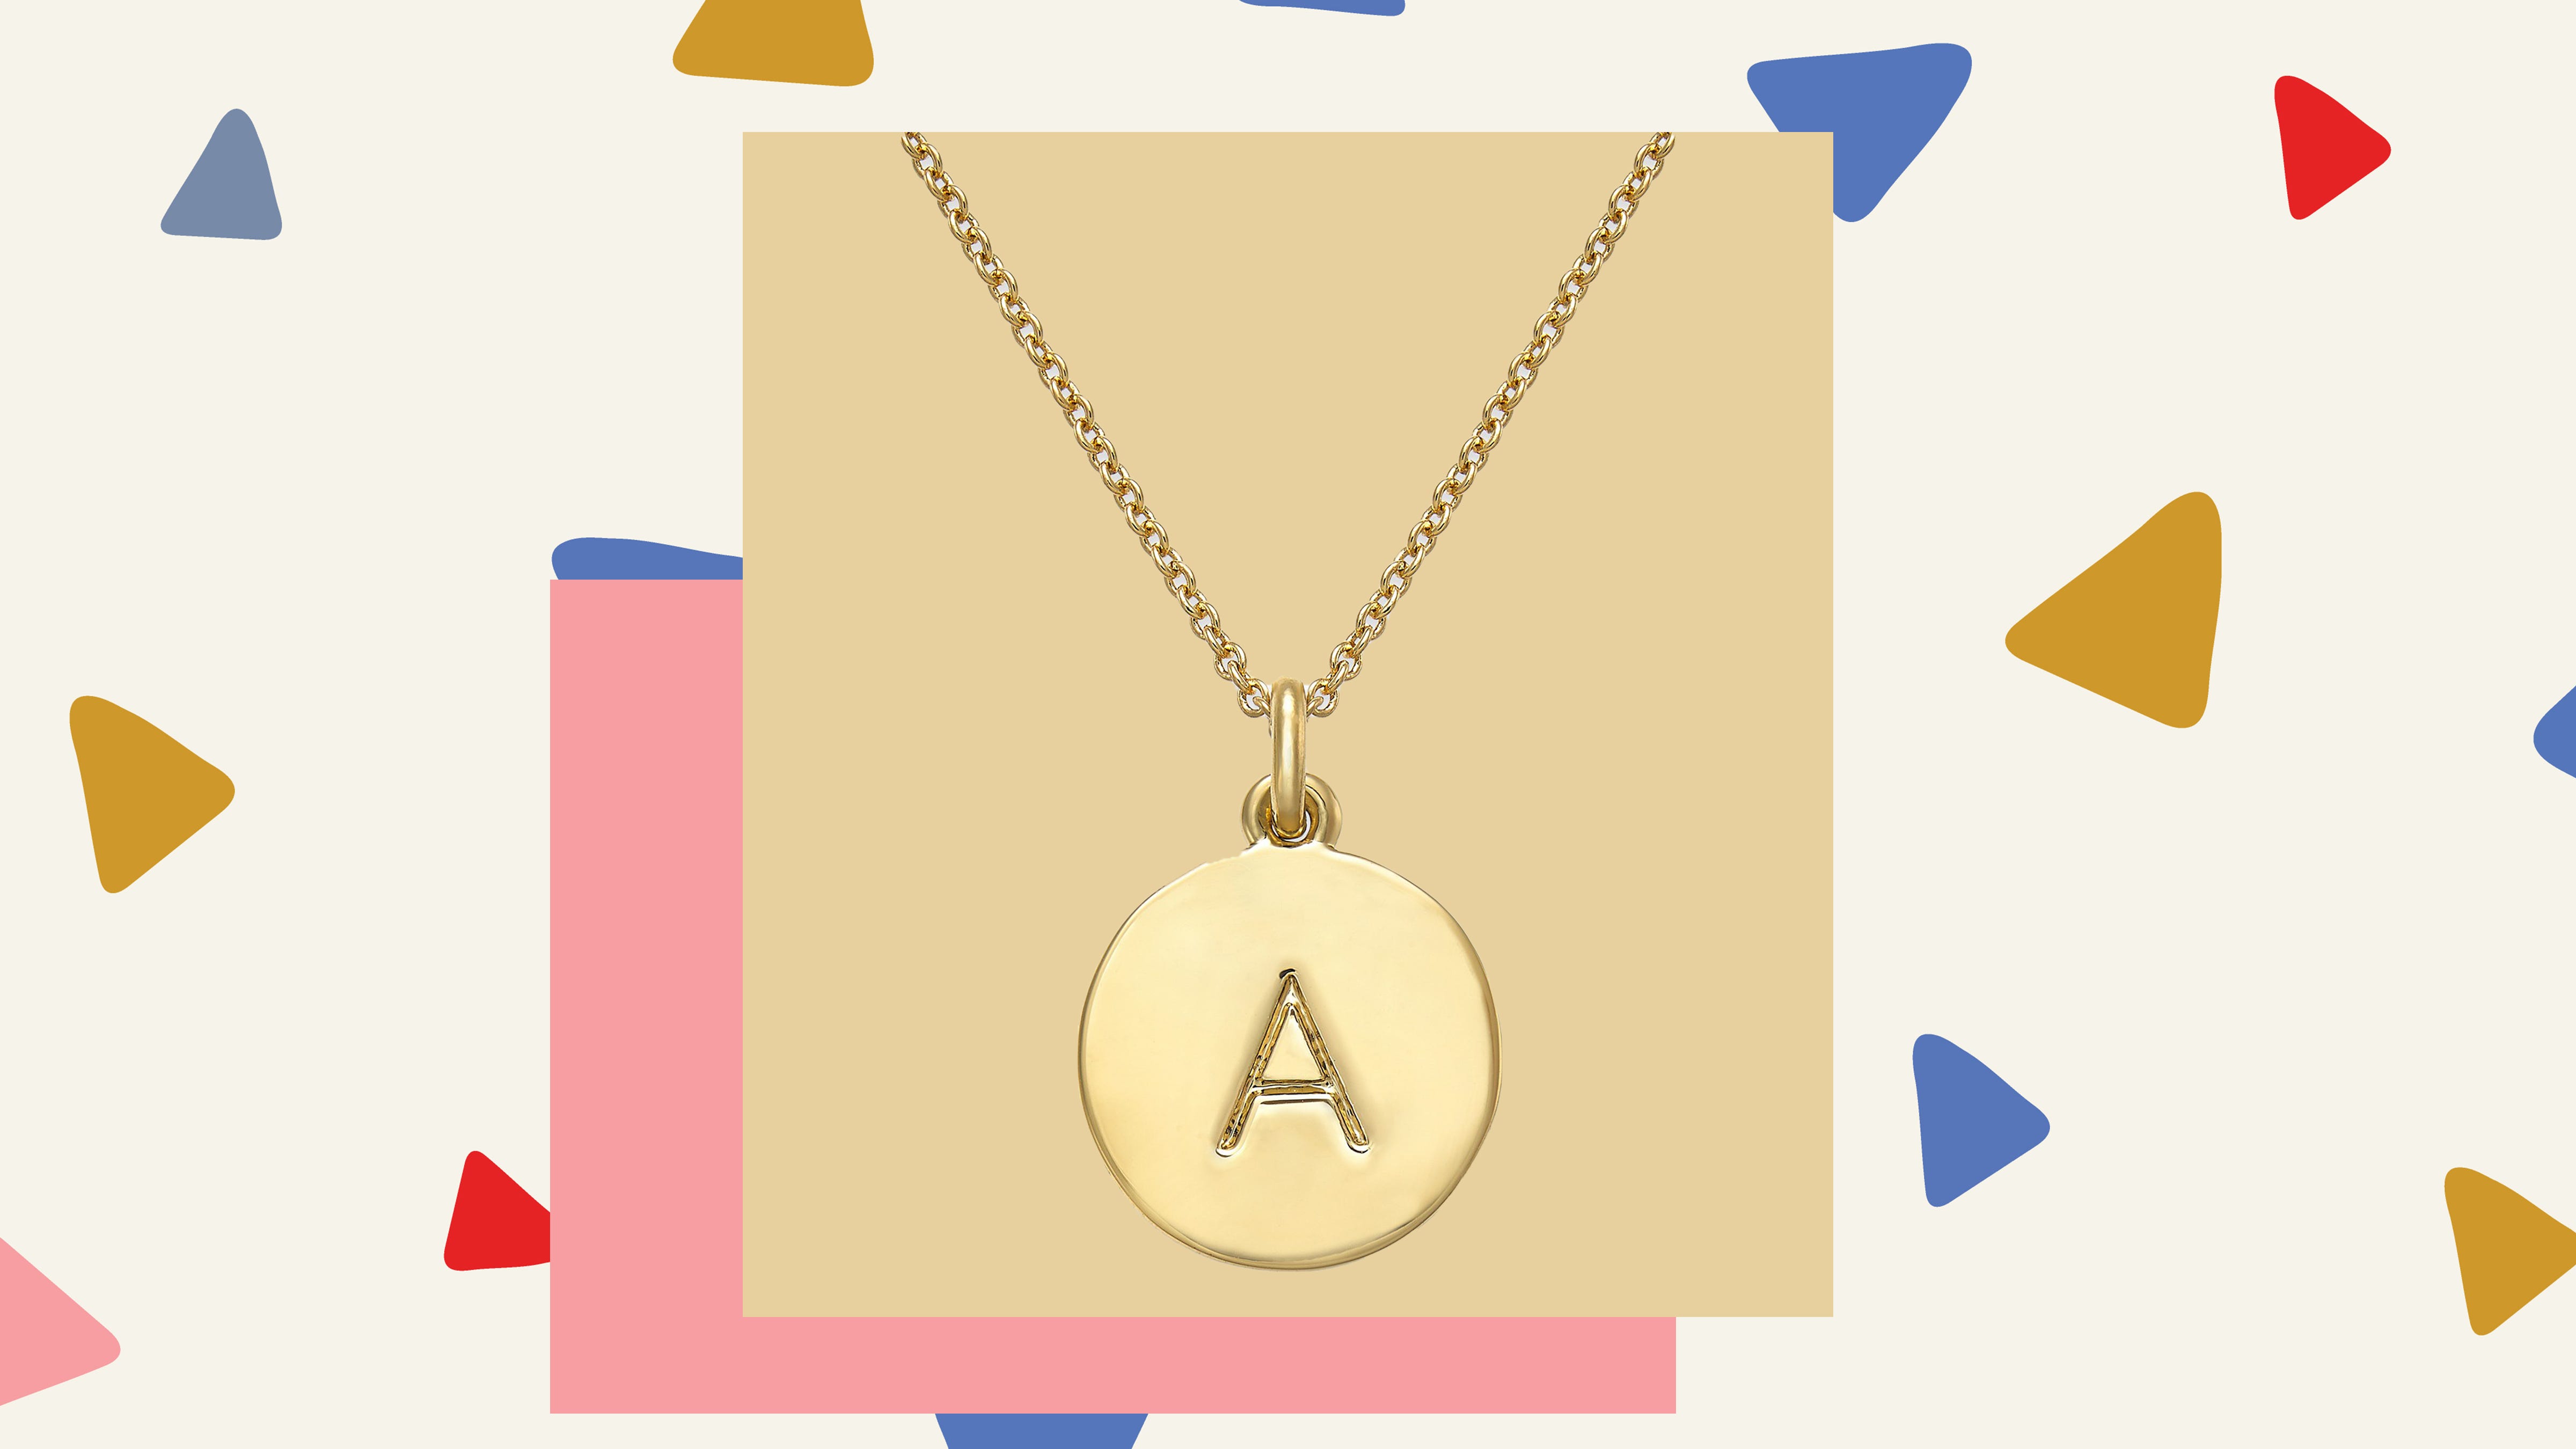 Kate Spade necklace: This popular initial pendant is 40% off